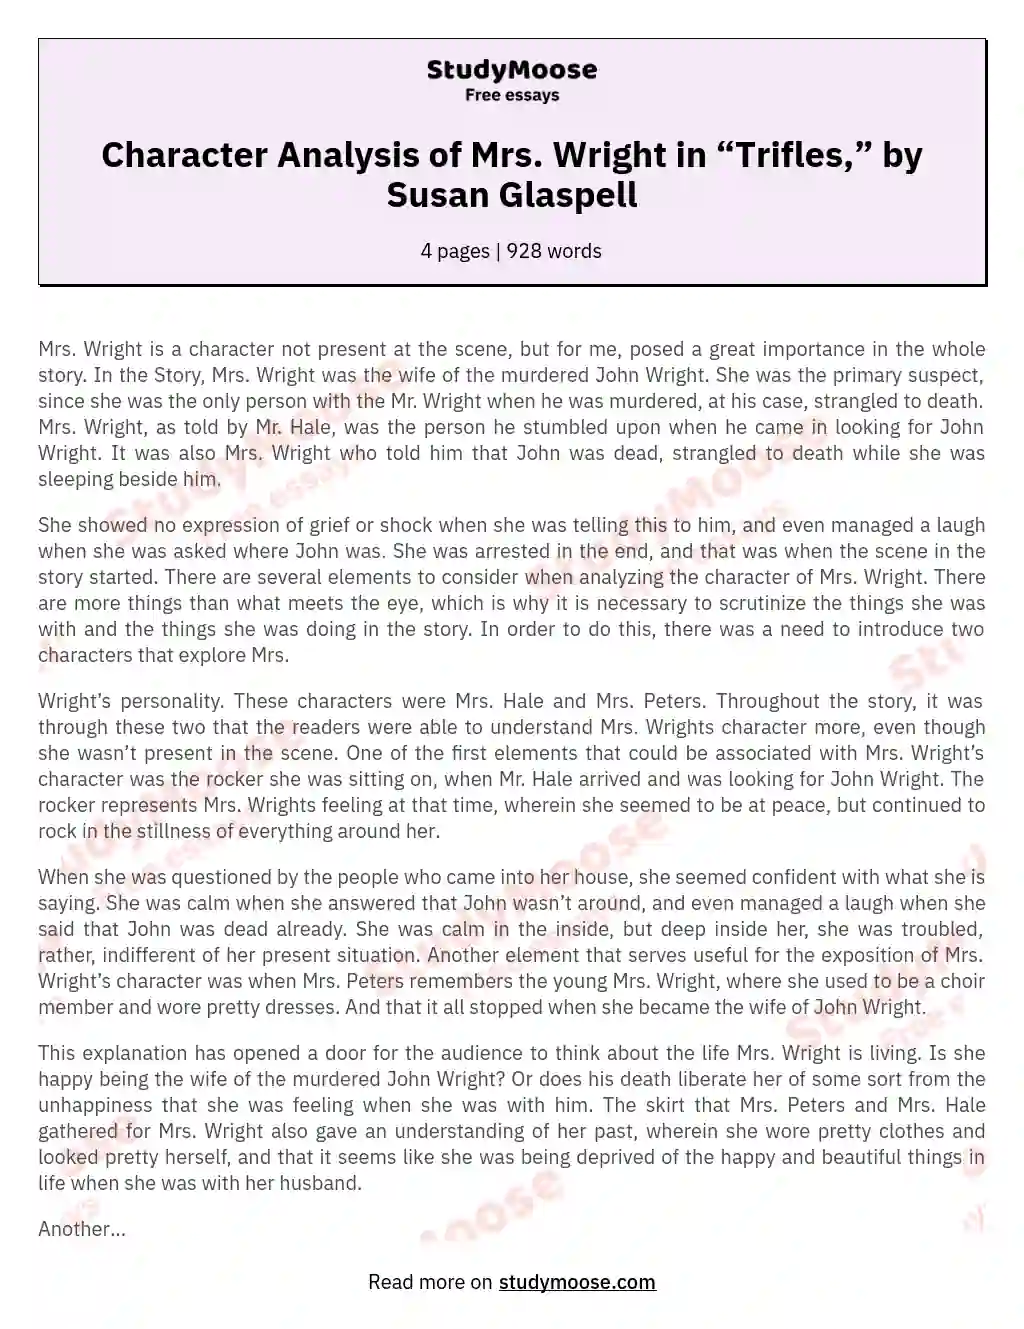 Character Analysis of Mrs. Wright in “Trifles,” by Susan Glaspell essay